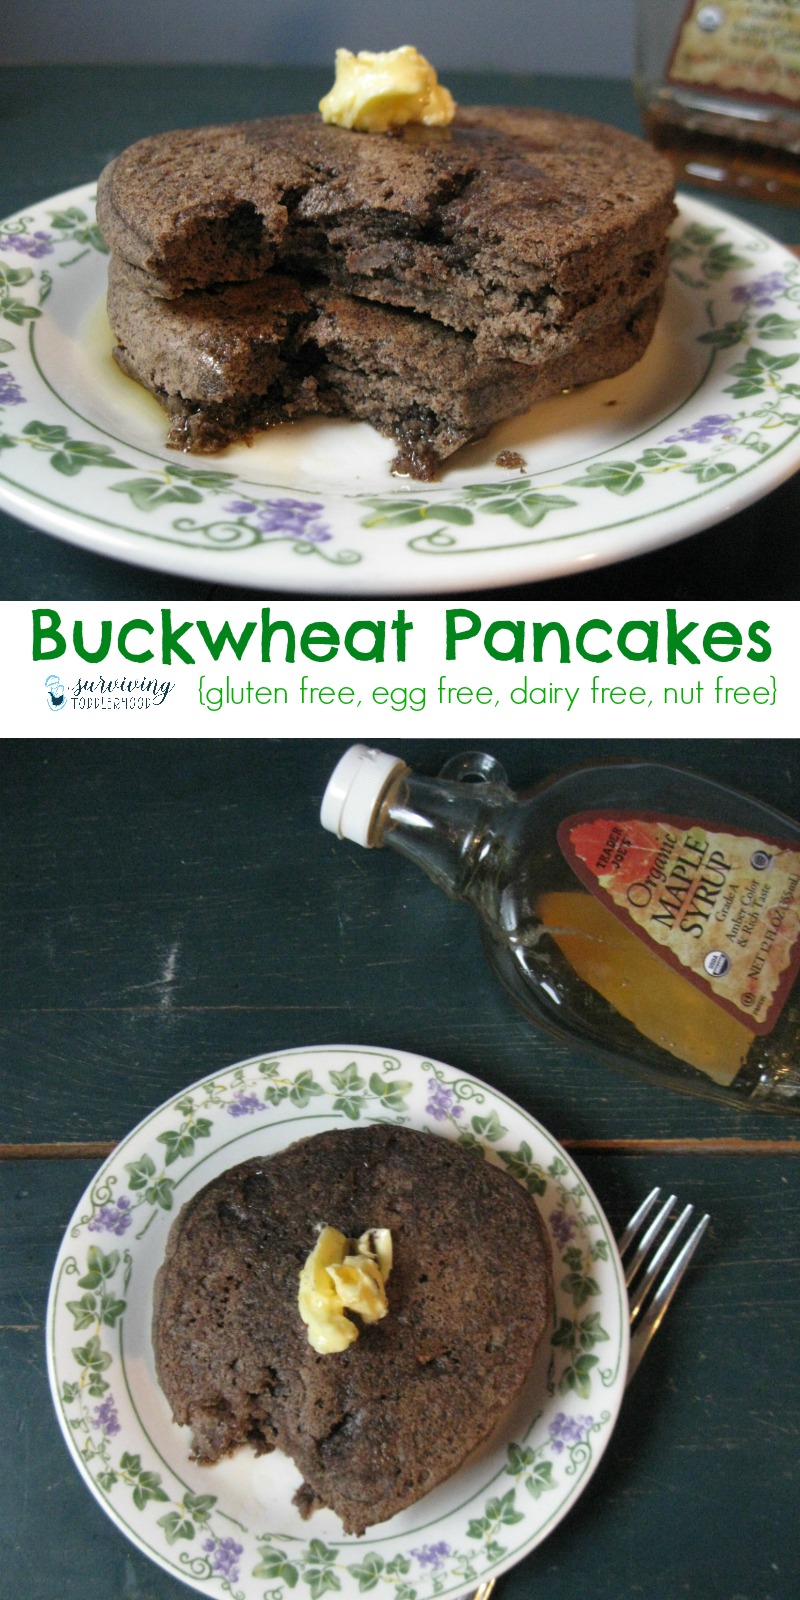 Gluten Free Buckwheat Pancakes {Grain free, Trim Healthy Mama E recipe, Egg free, Dairy free, Nut free} Trying to find a gluten free buckwheat pancake recipe? This recipe is for you!! Only 5 ingredients needed for this breakfast pancake recipe. |Trim Healthy Mama E Meal | Gluten free breakfast recipes | Grain free pancake recipe | Egg free pancakes | dairy free pancakes | 